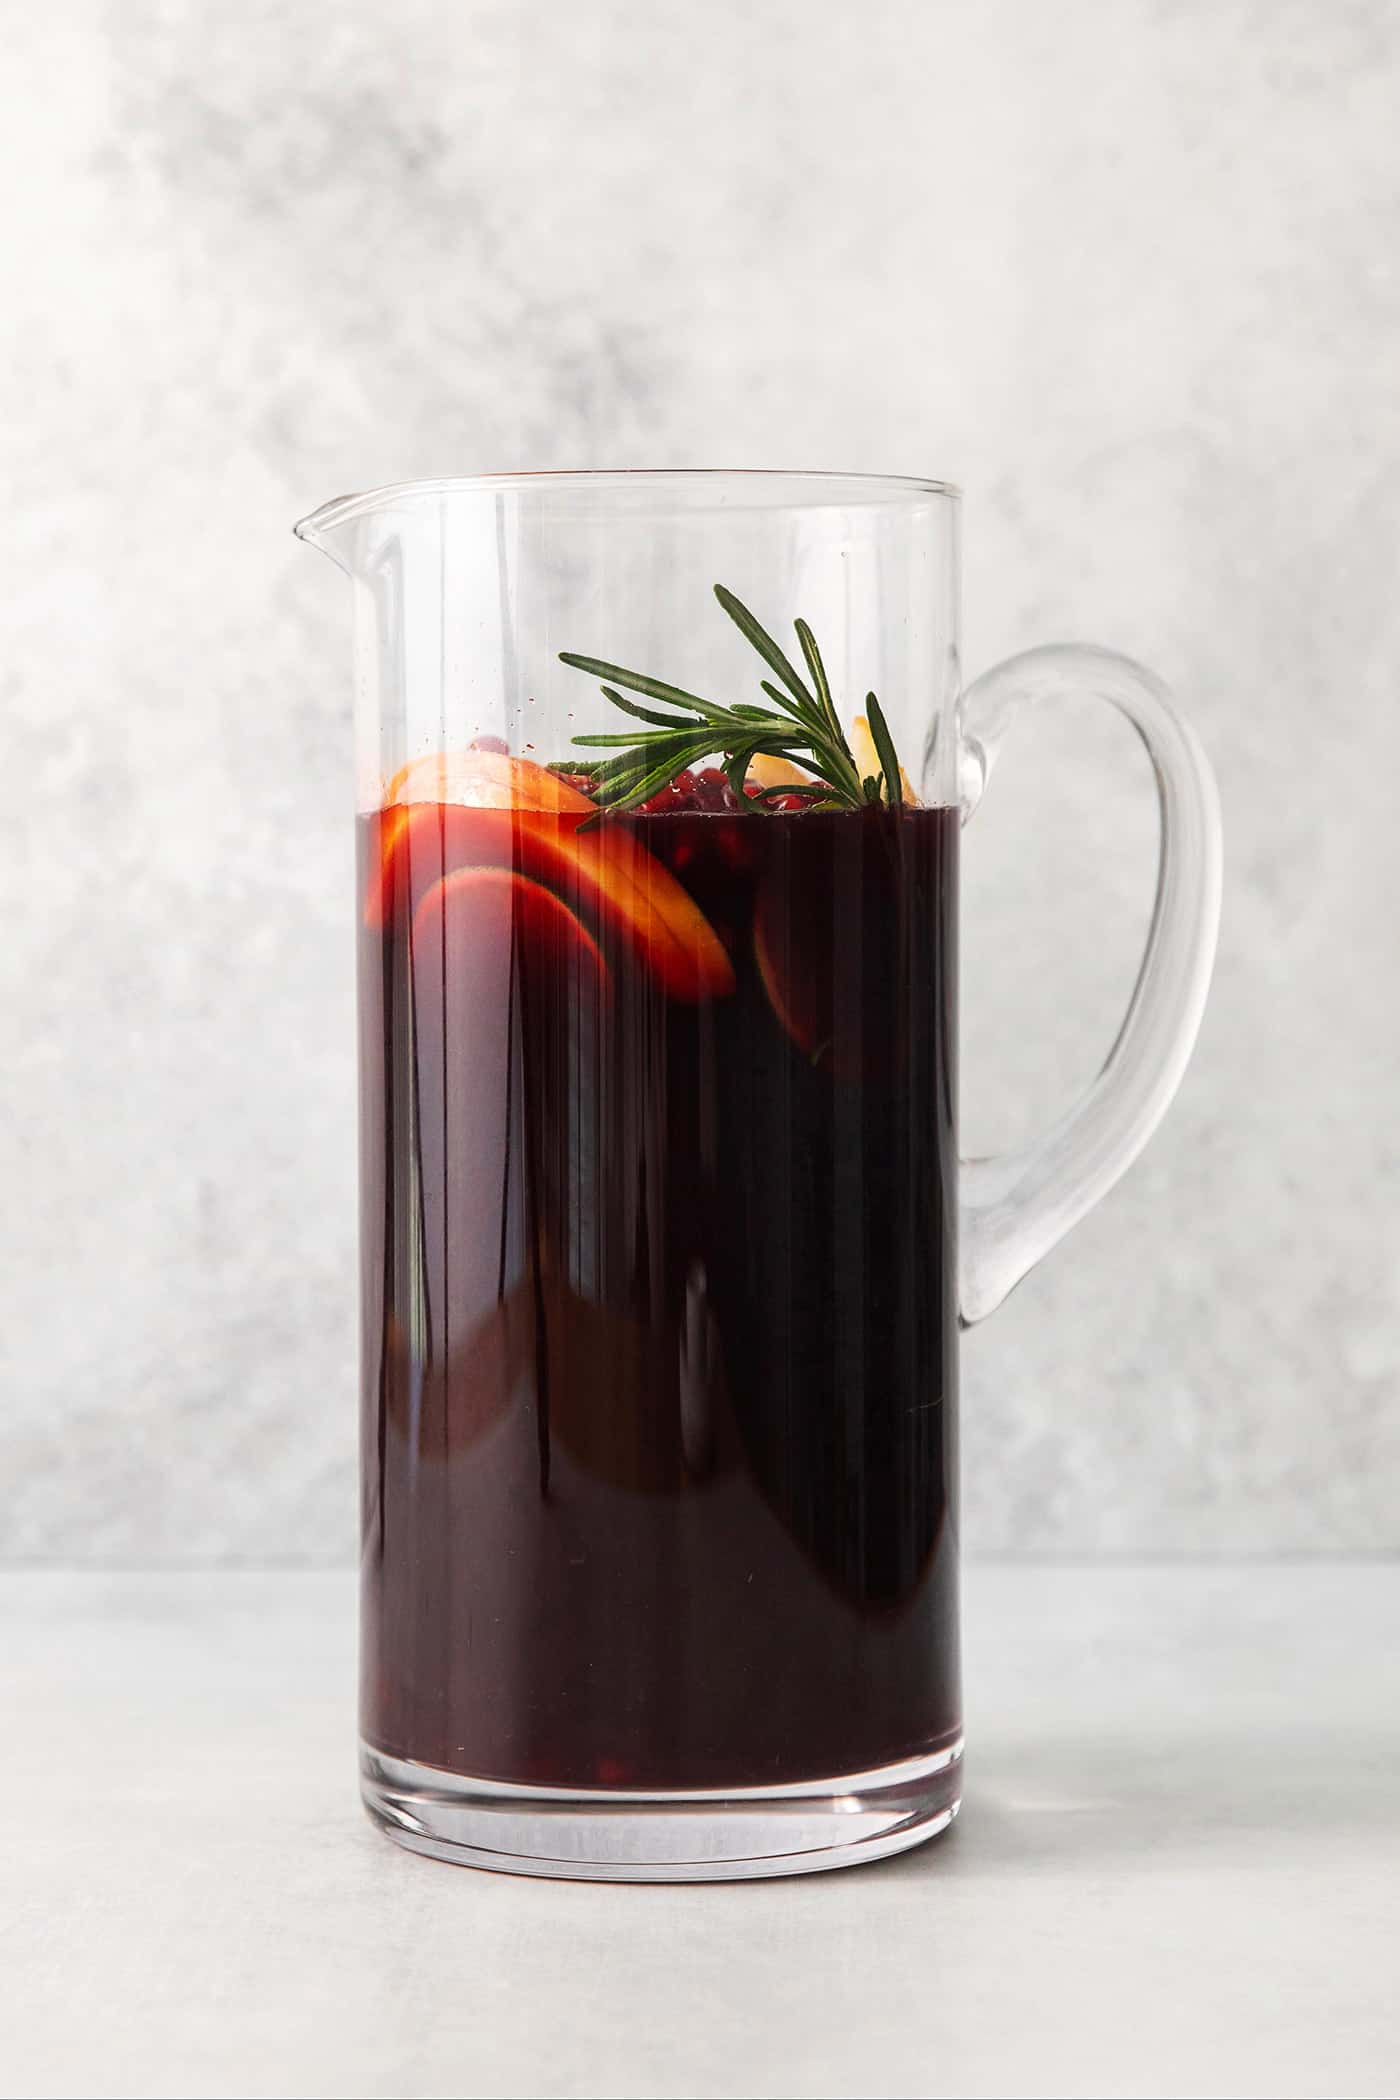 A tall glass pitcher with a handle holds red sangria that's garnished with a sprig of fresh rosemary.